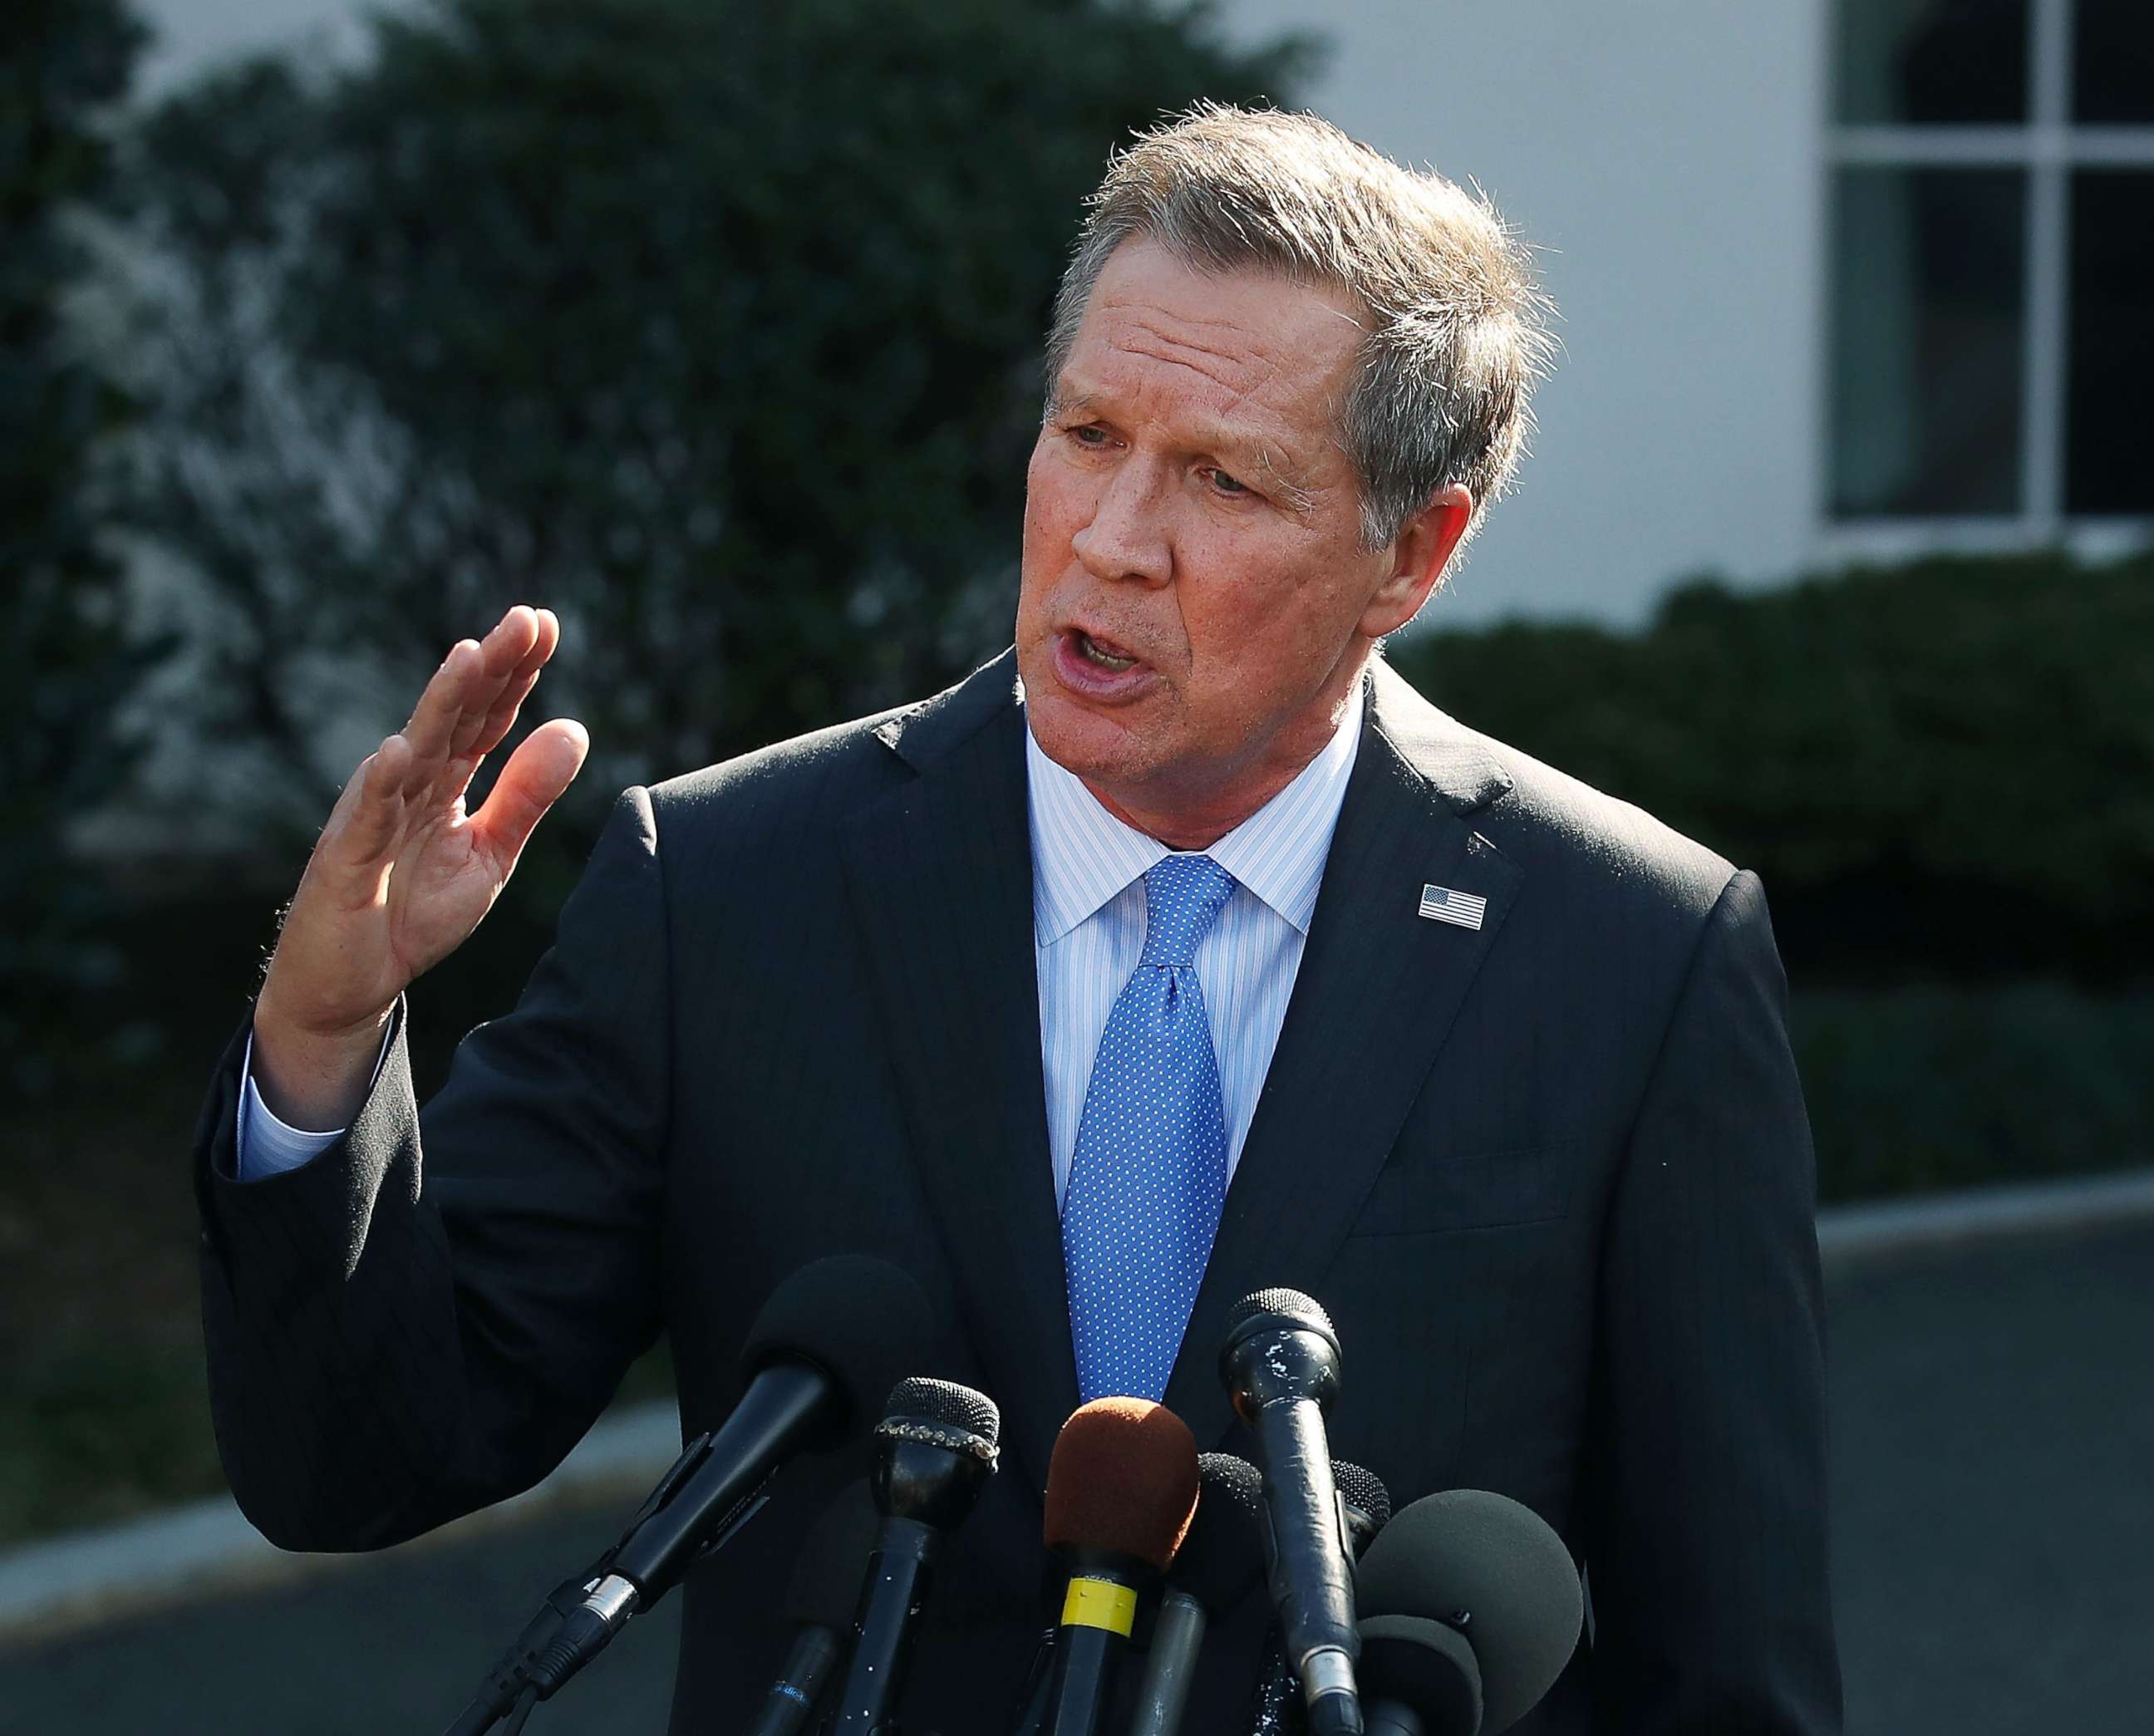 PHOTO: Ohio Governor John Kasich speaks to reporters after a closed meeting with President Donald Trump, Feb. 24, 2017 in Washington, D.C. 